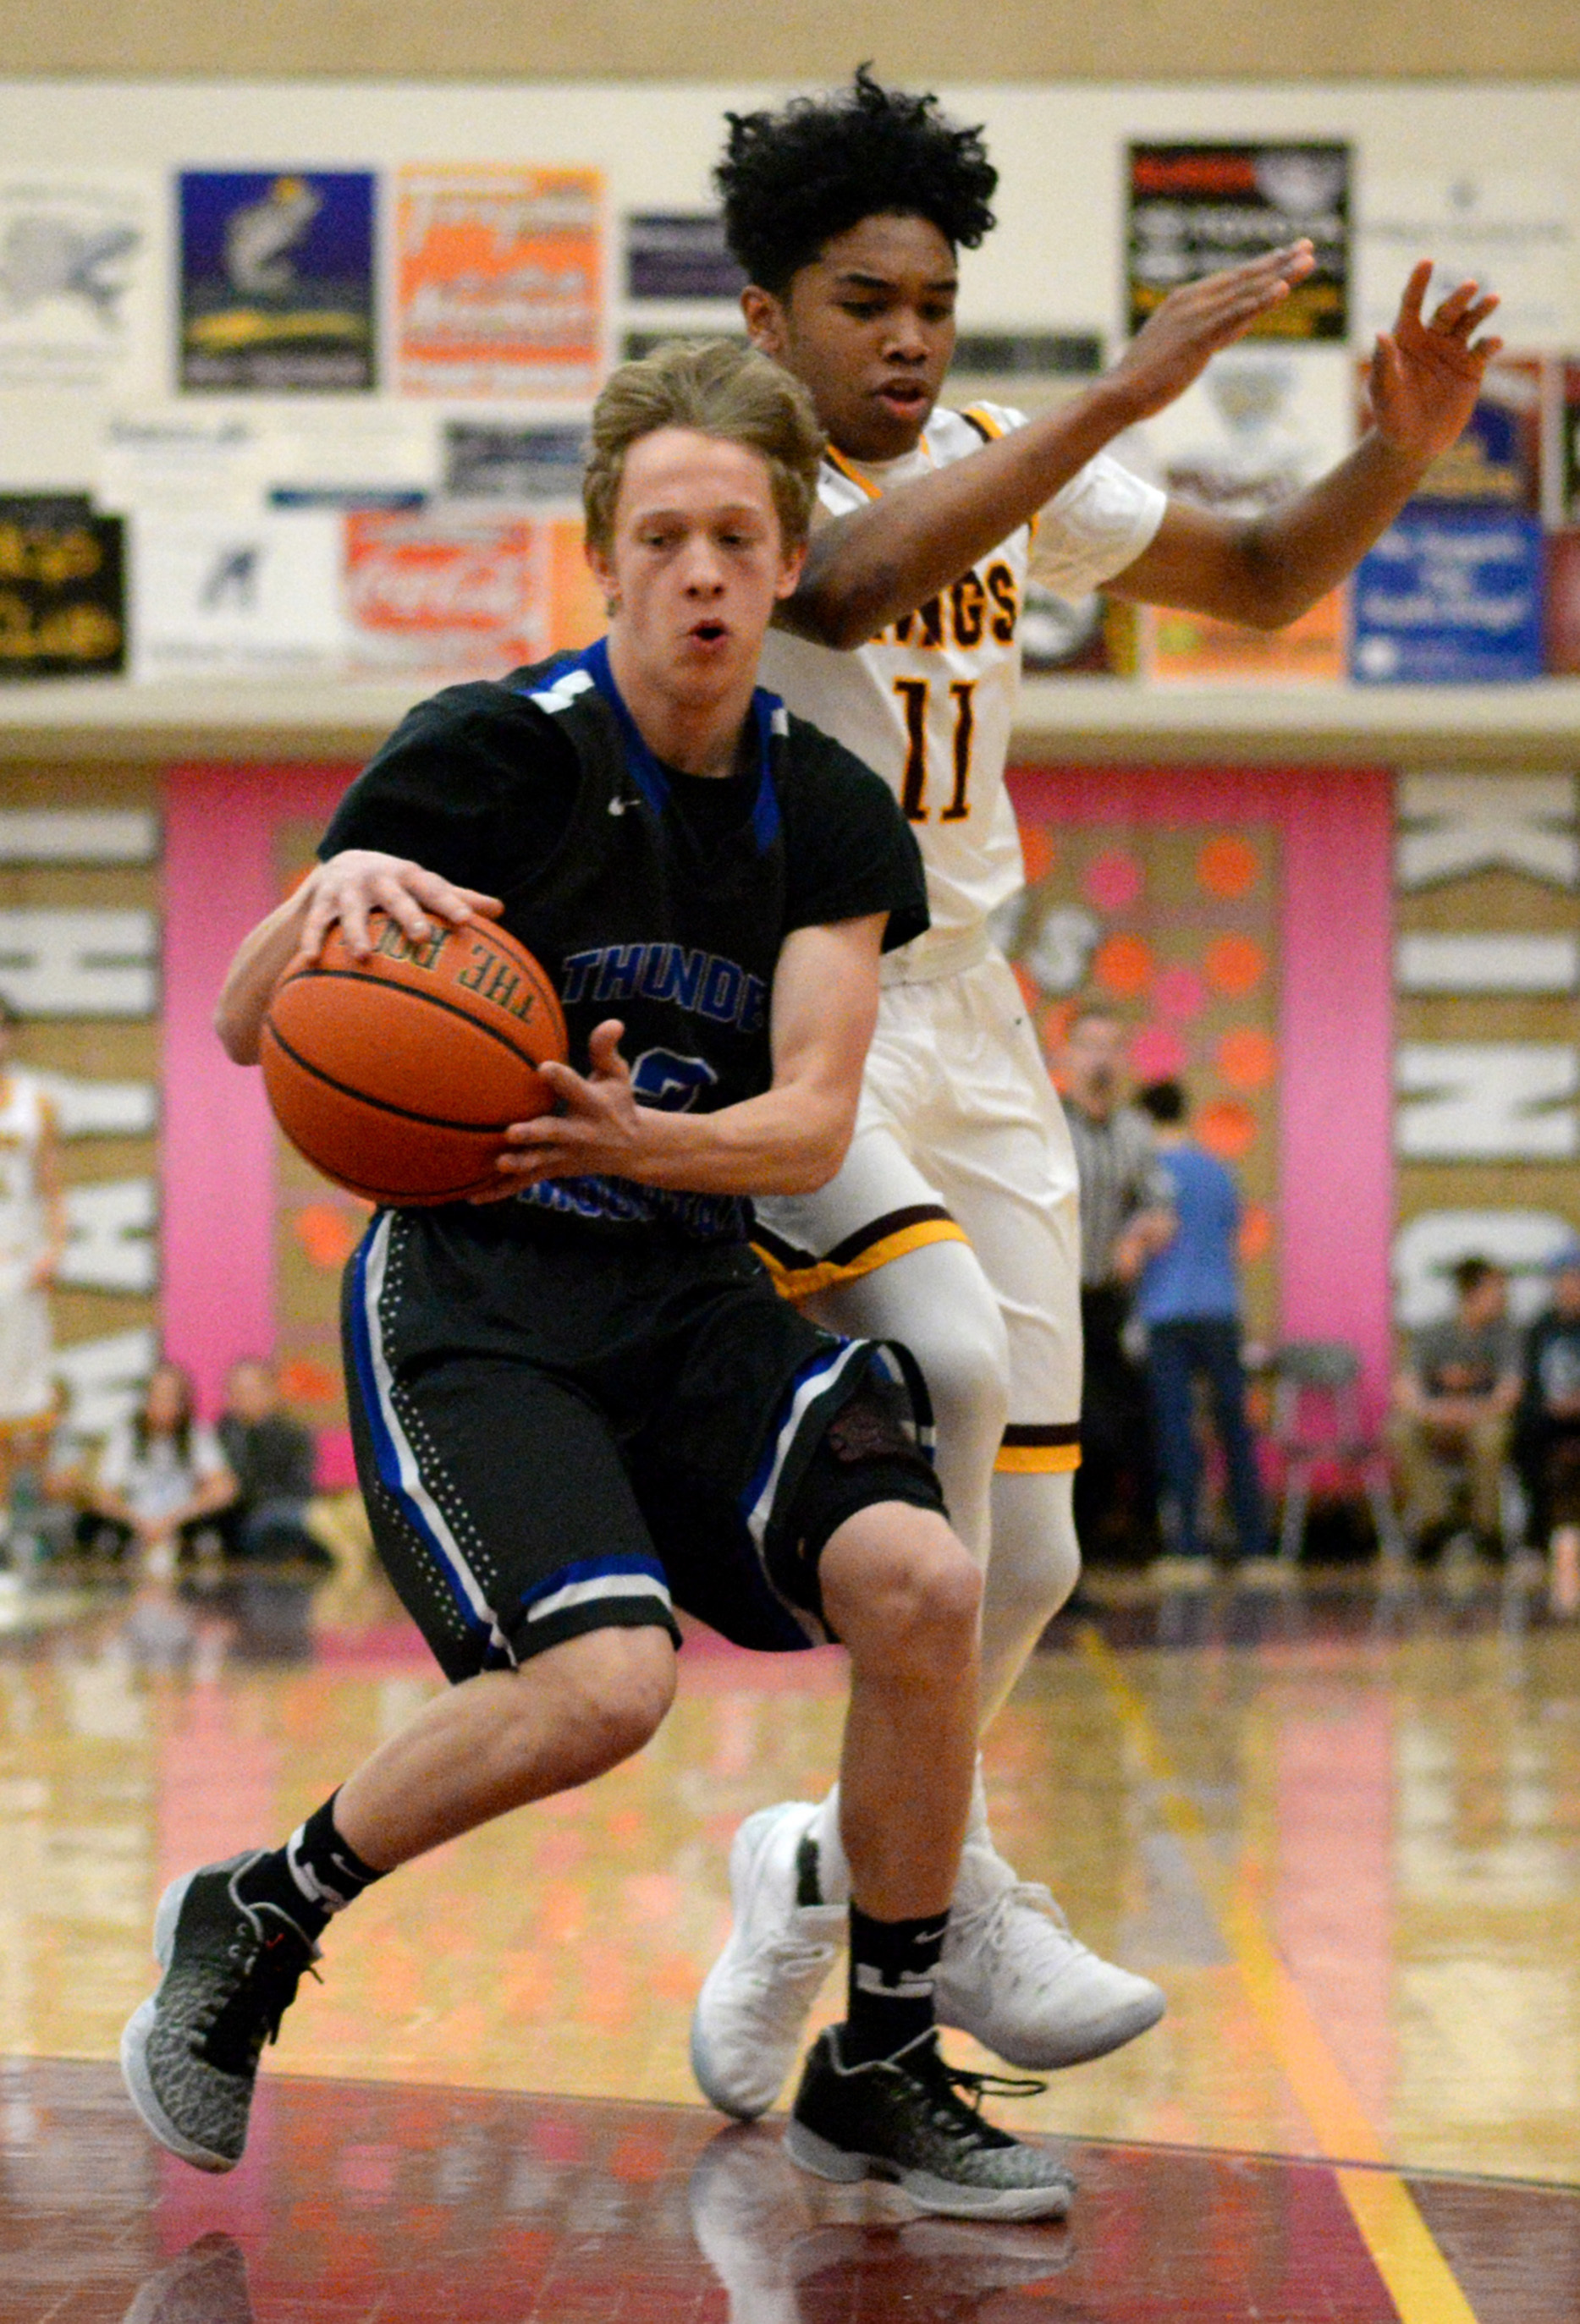 Thunder Mountain senior Zebadiah Storie (2) makes a move around Ketchikan High School freshman Chris Lee (11) on Saturday, Feb. 25, 2017, during the Falcons’ 68-67 loss to the Kings in the Clarke Cochrane Gym. (Taylor Balkom | Ketchikan Daily News)